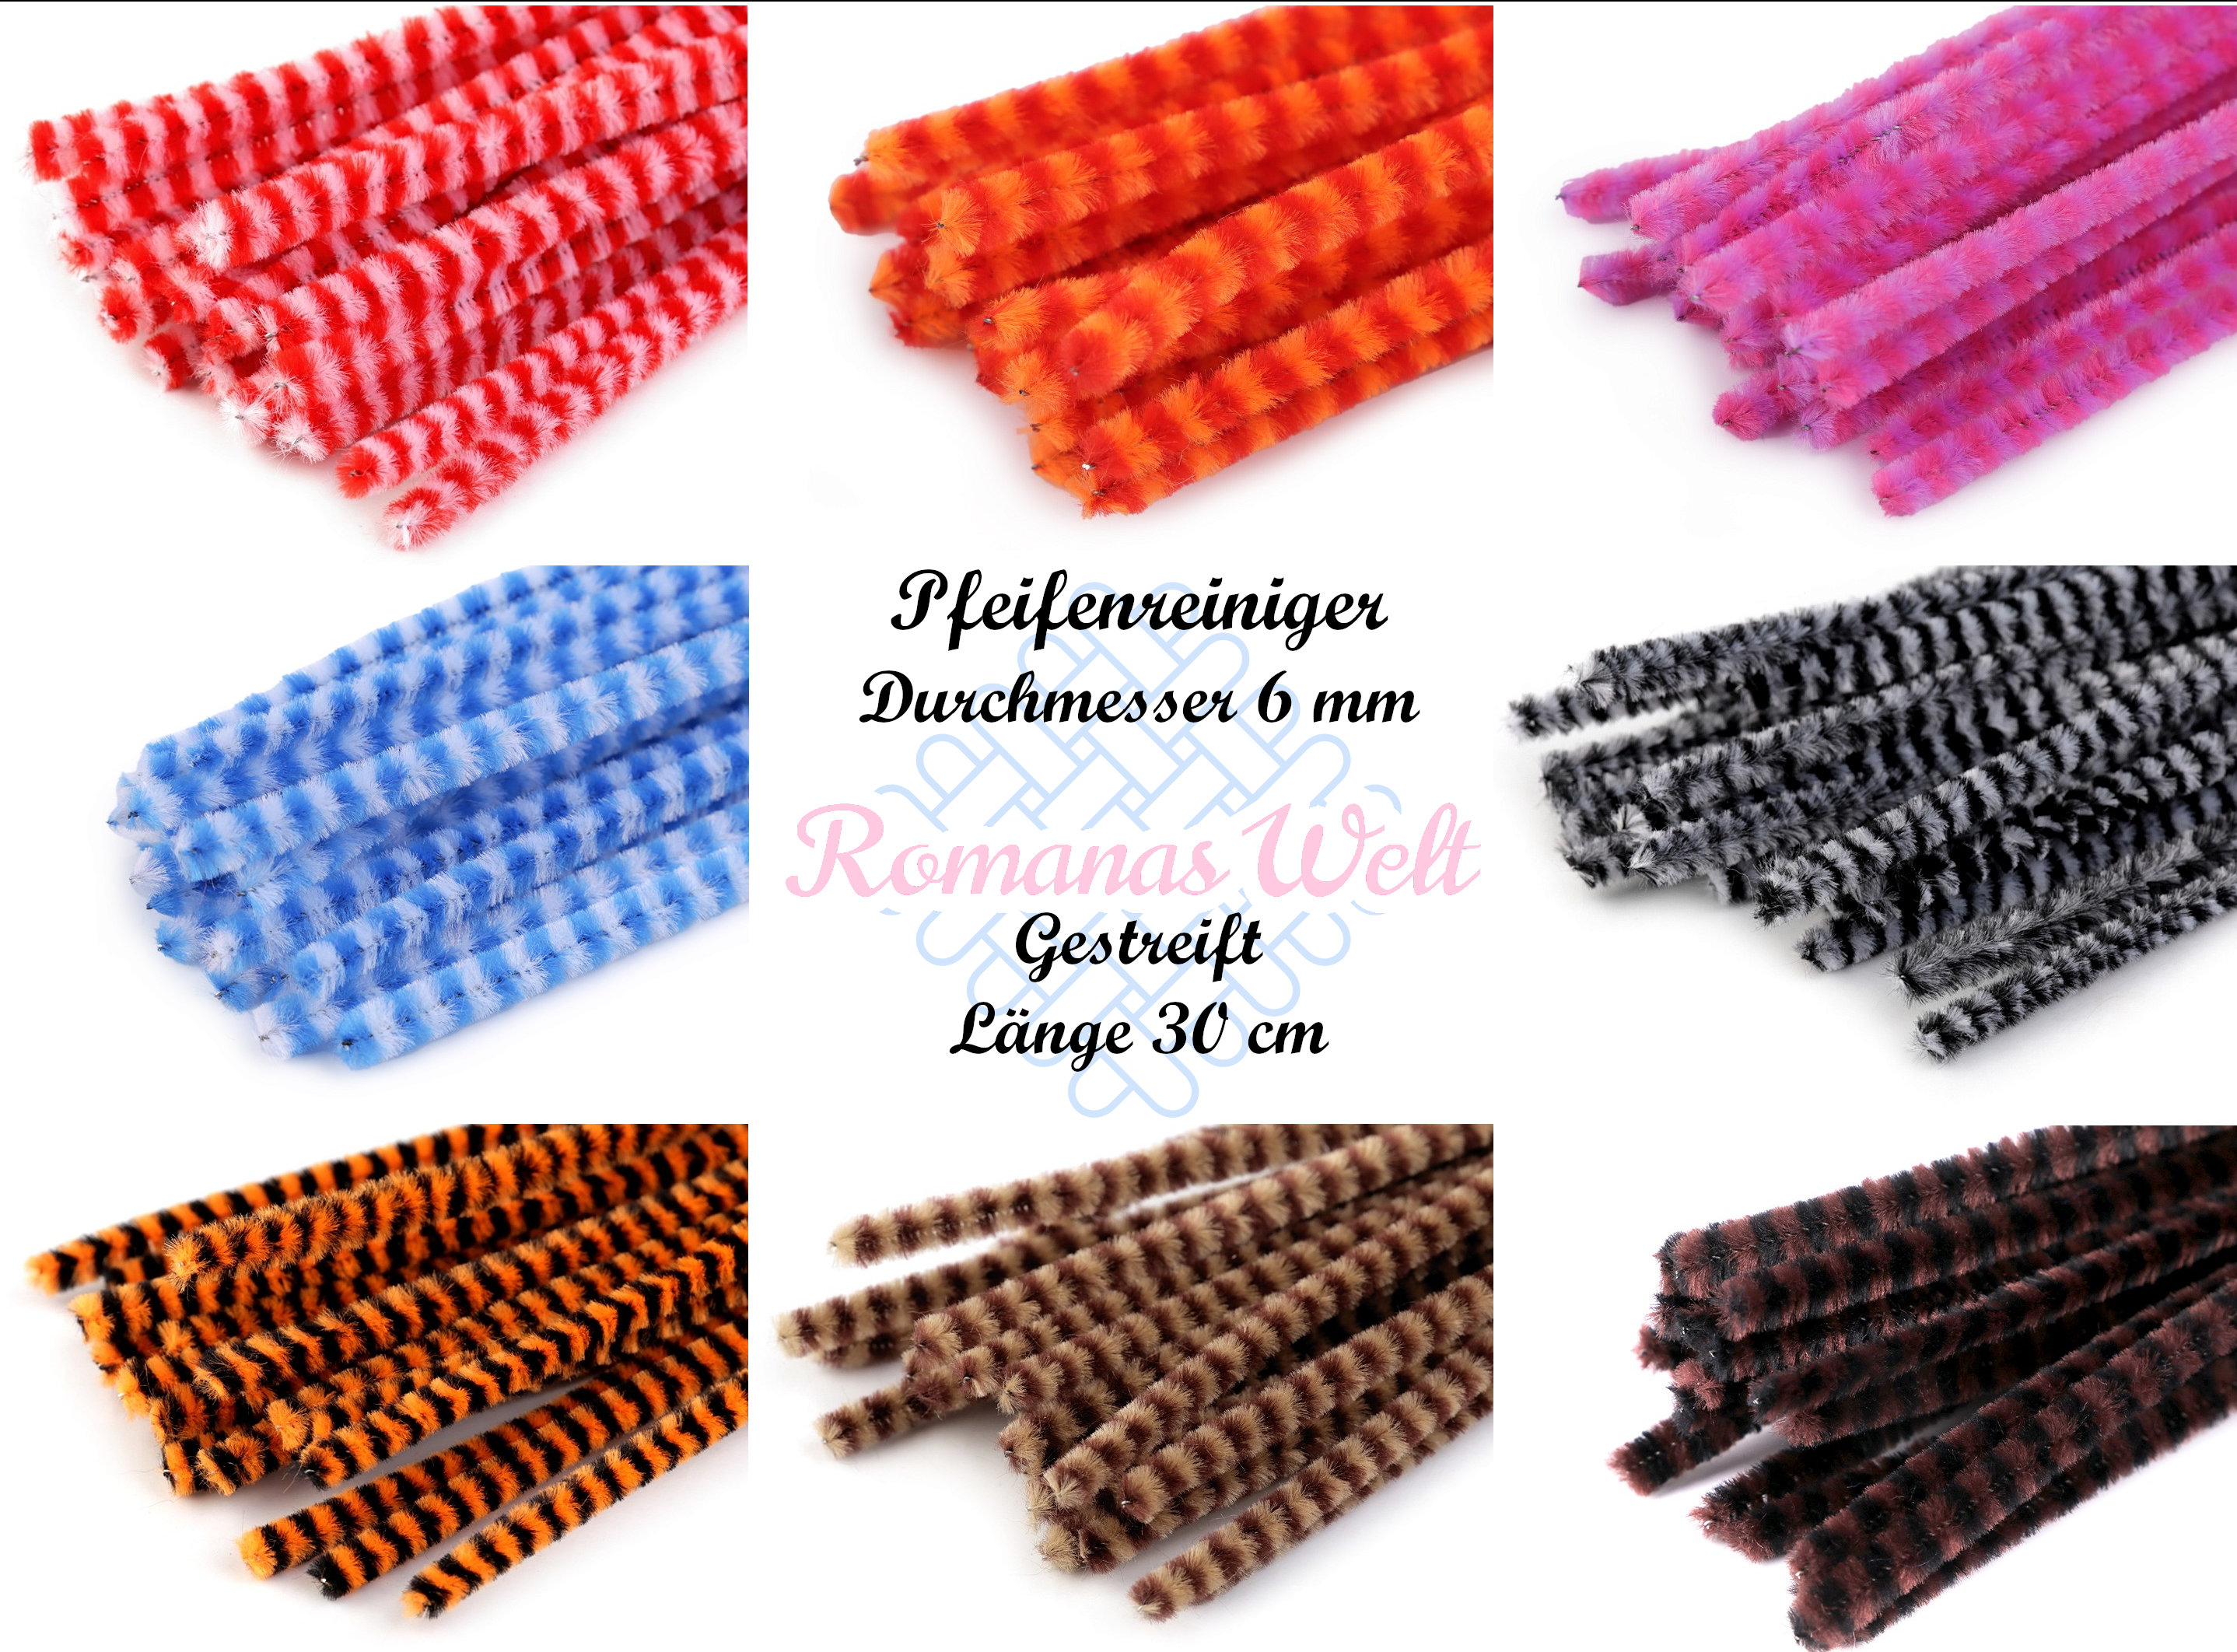 Whosesale 50pcs/lot Pipe Cleaners Hard Bristle Smoking Clean Tool